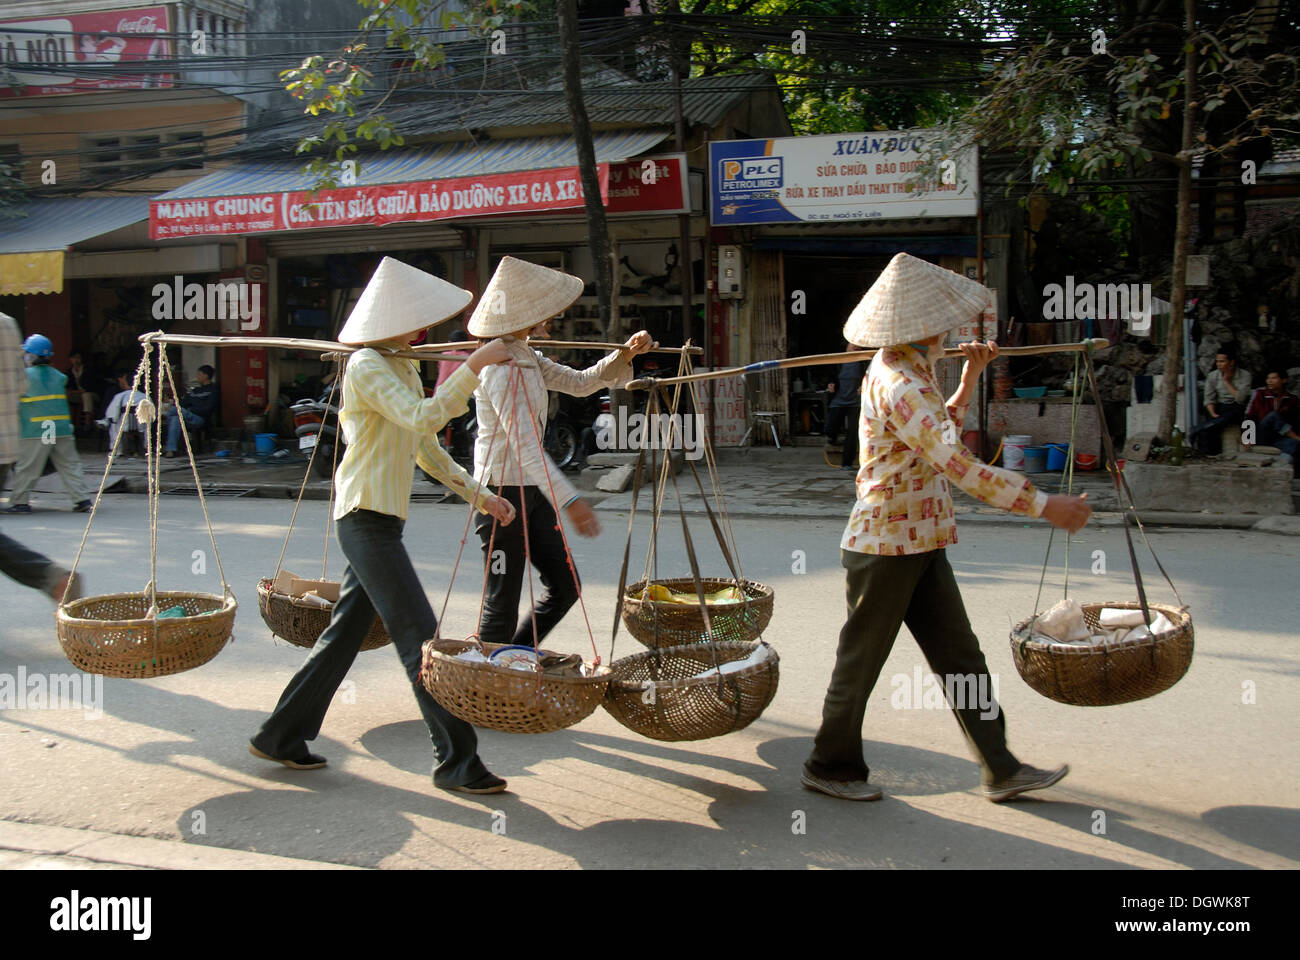 Three Vietnamese woman wearing rice hats and carrying baskets on their shoulders, Hanoi, Vietnam, Asia Stock Photo